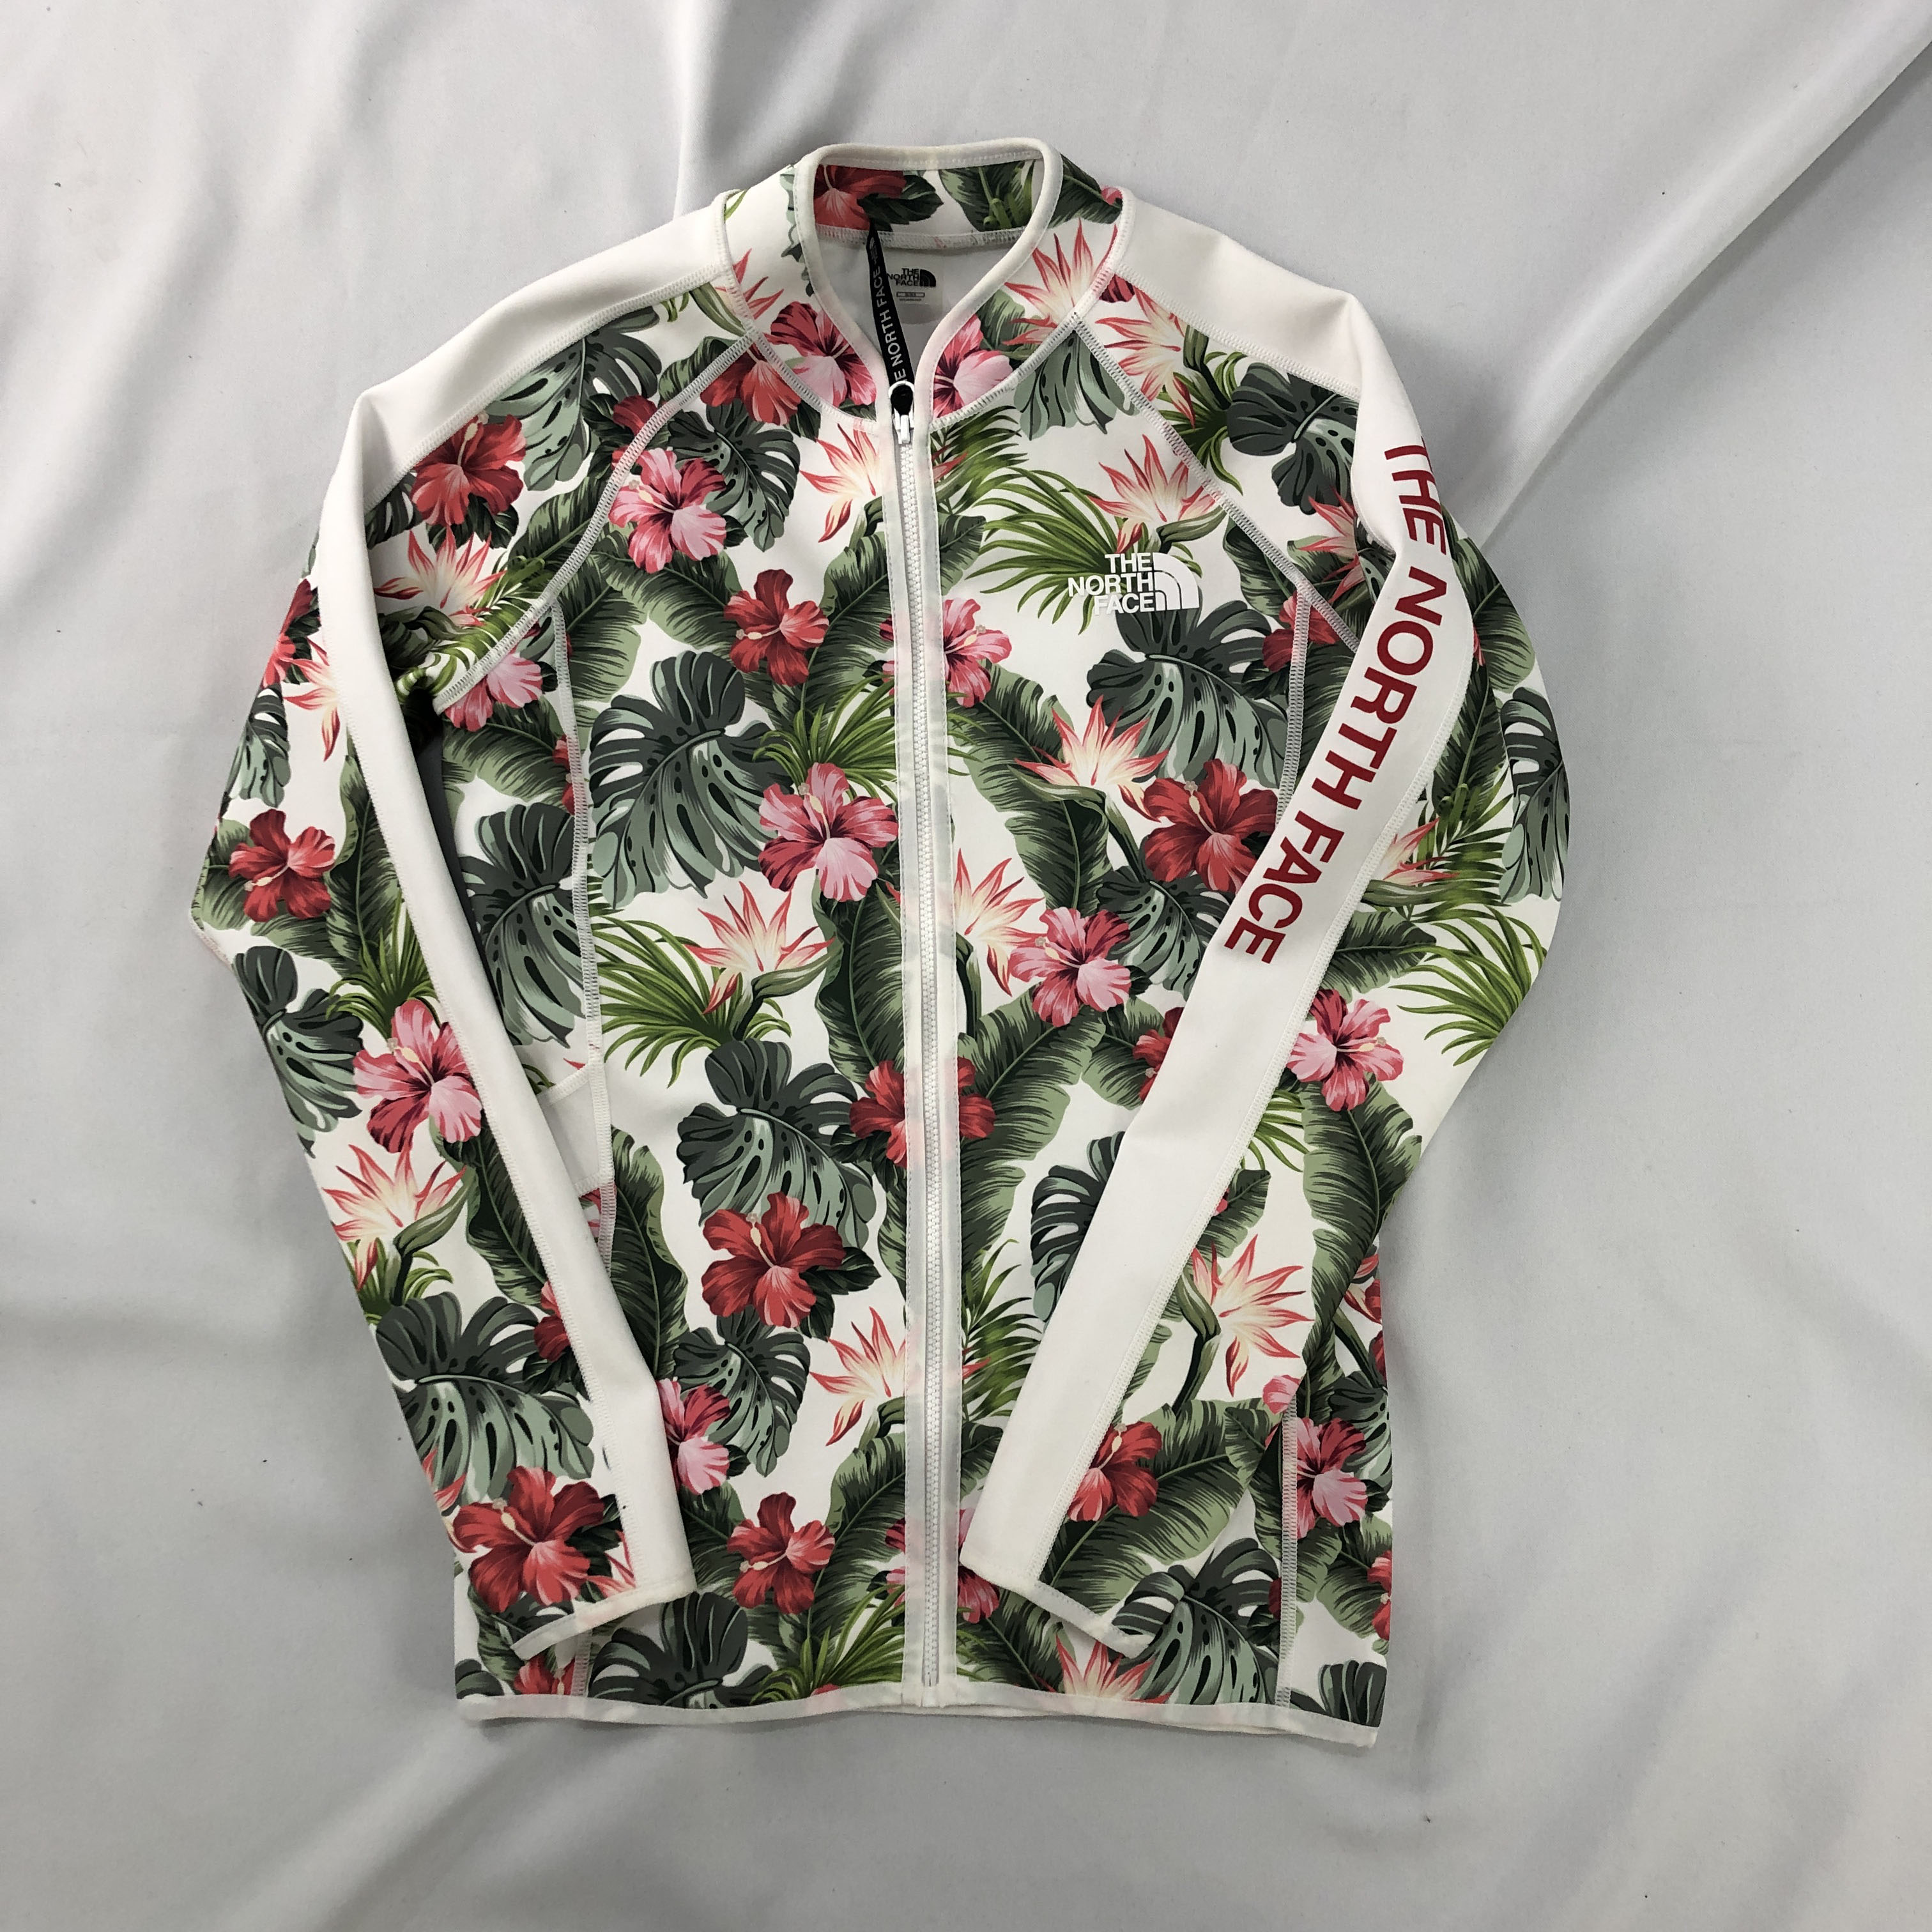 [North Face] Flower Patterned Jersey - Size S